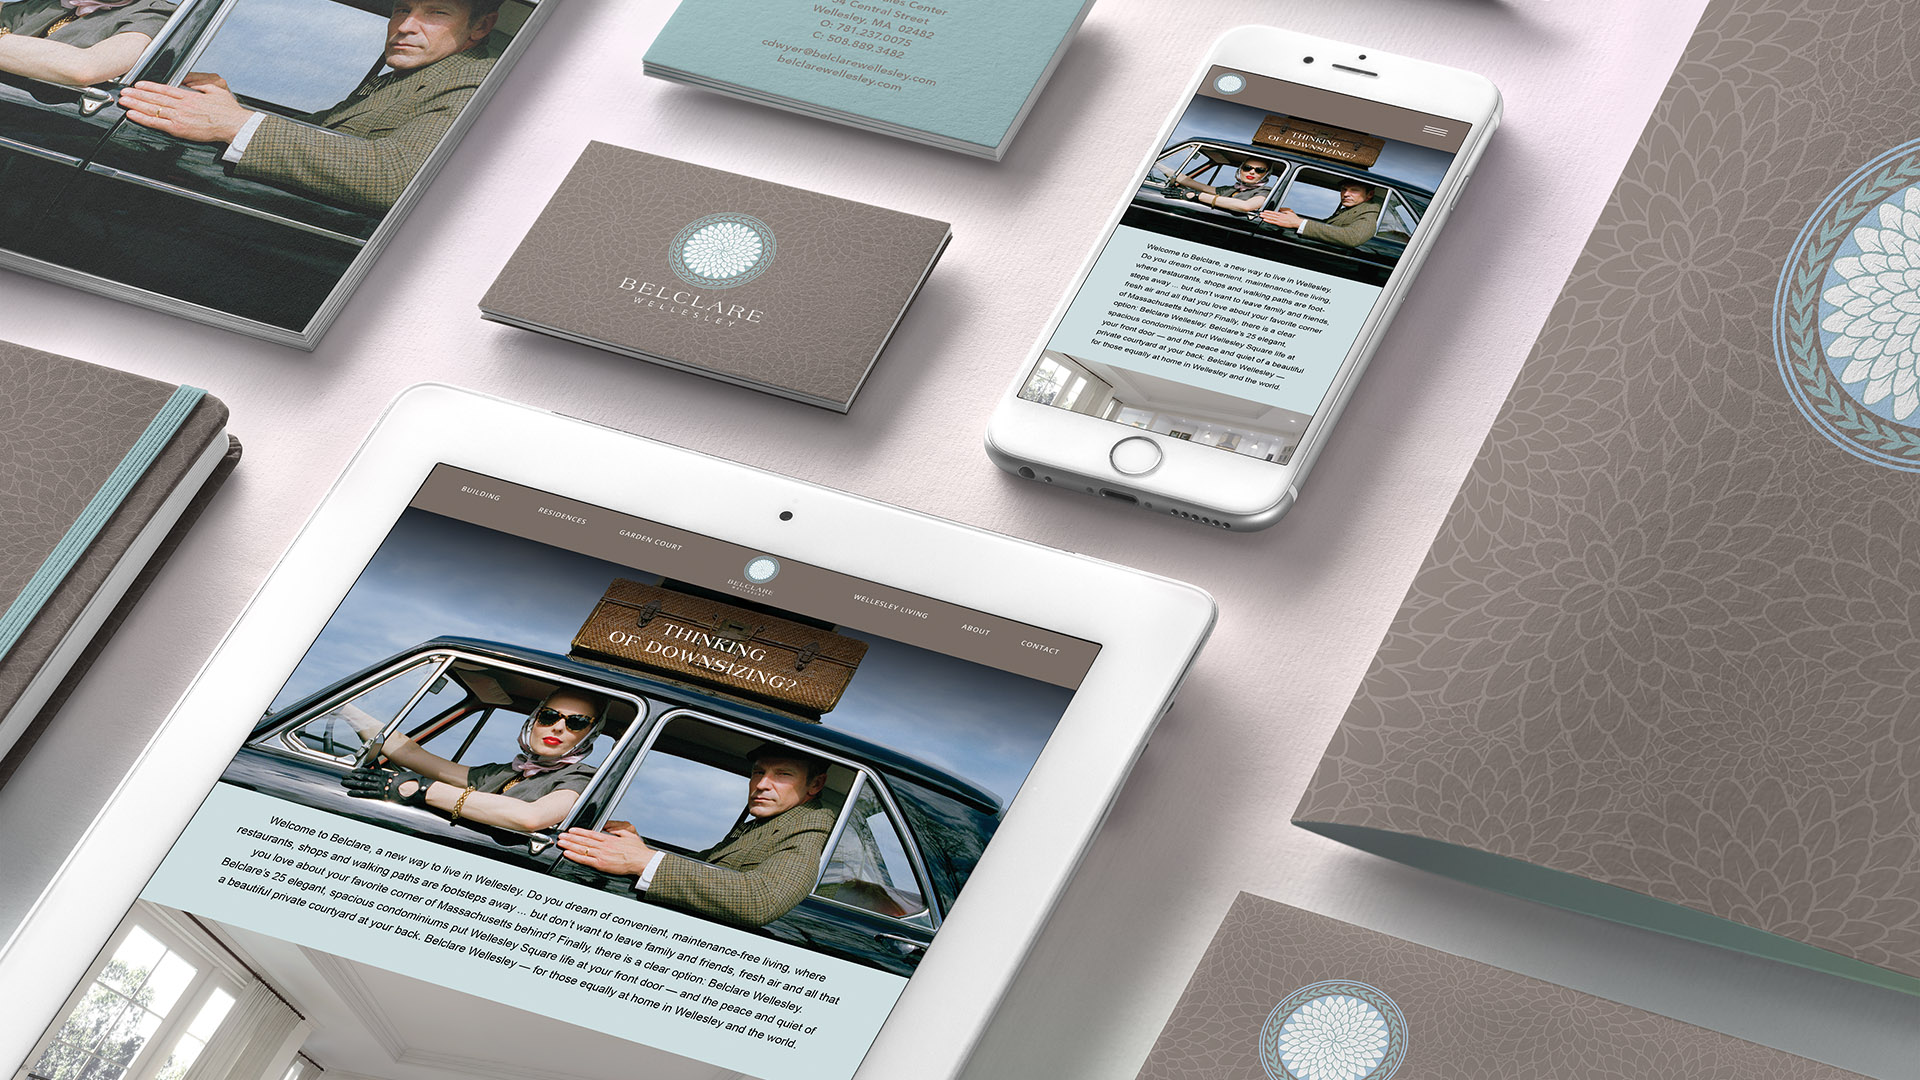 Belclare wellesley identity with iPad, business cards and iPhone website